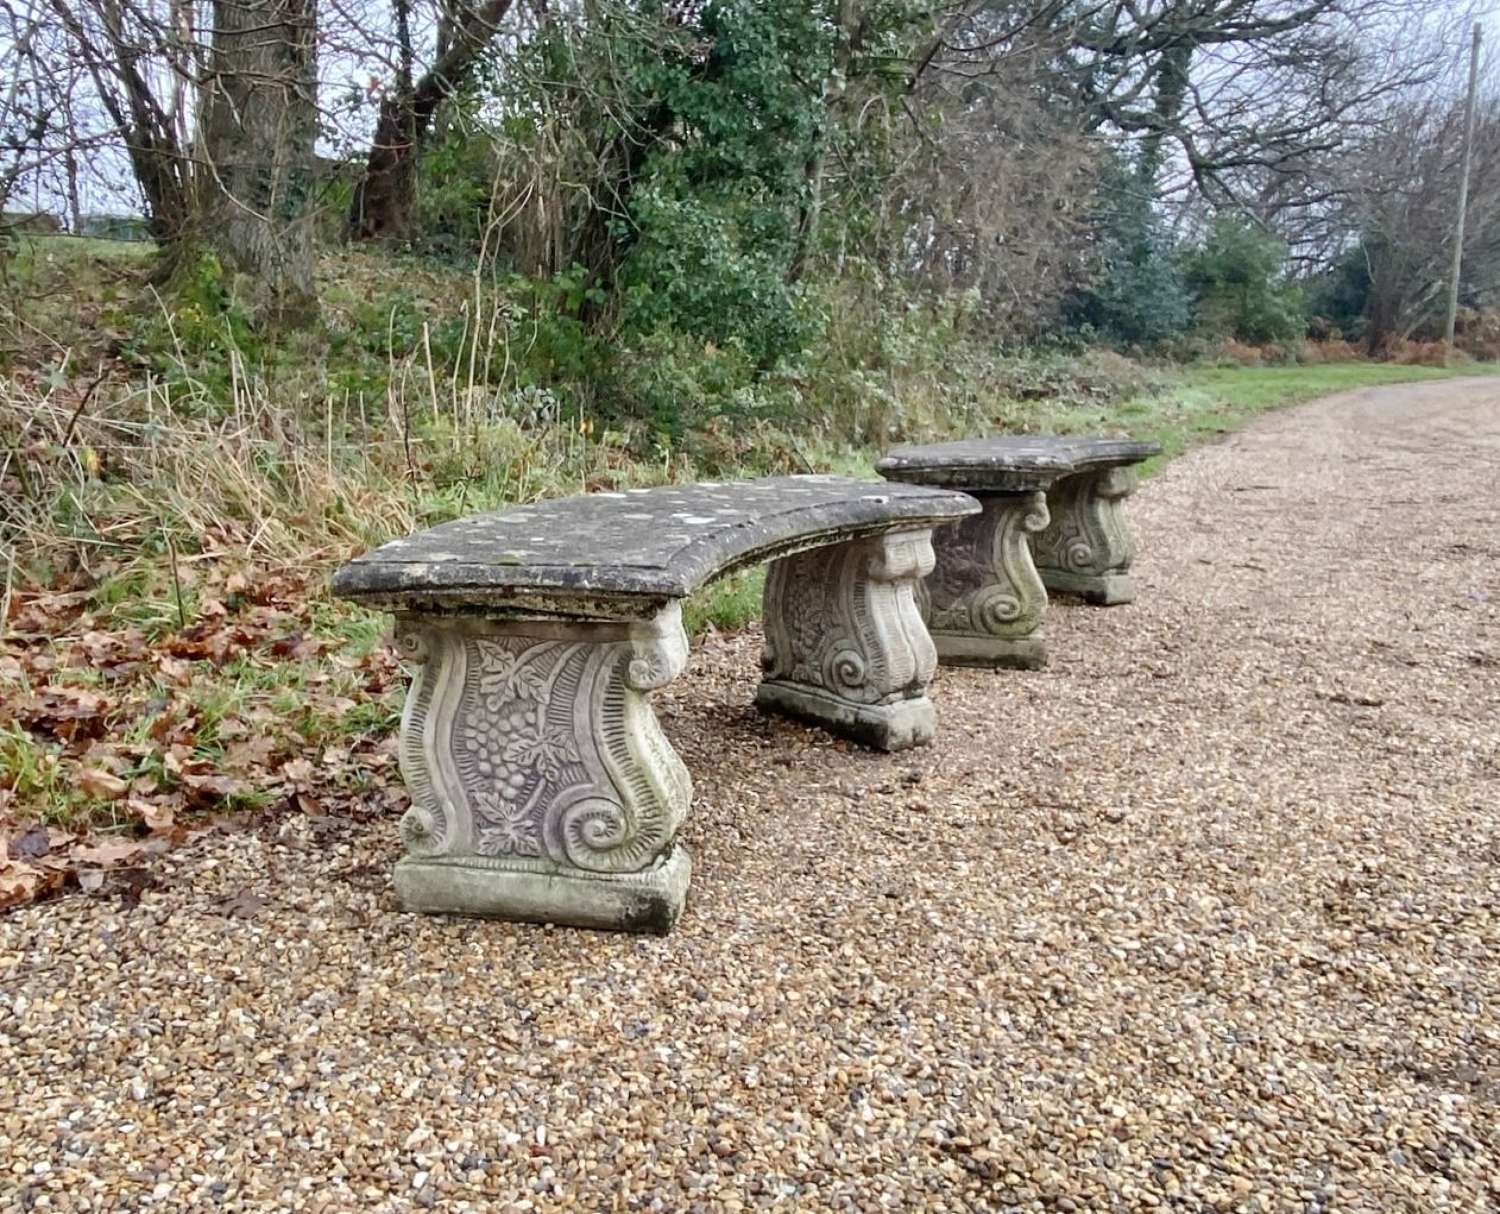 Curved Stone Benches